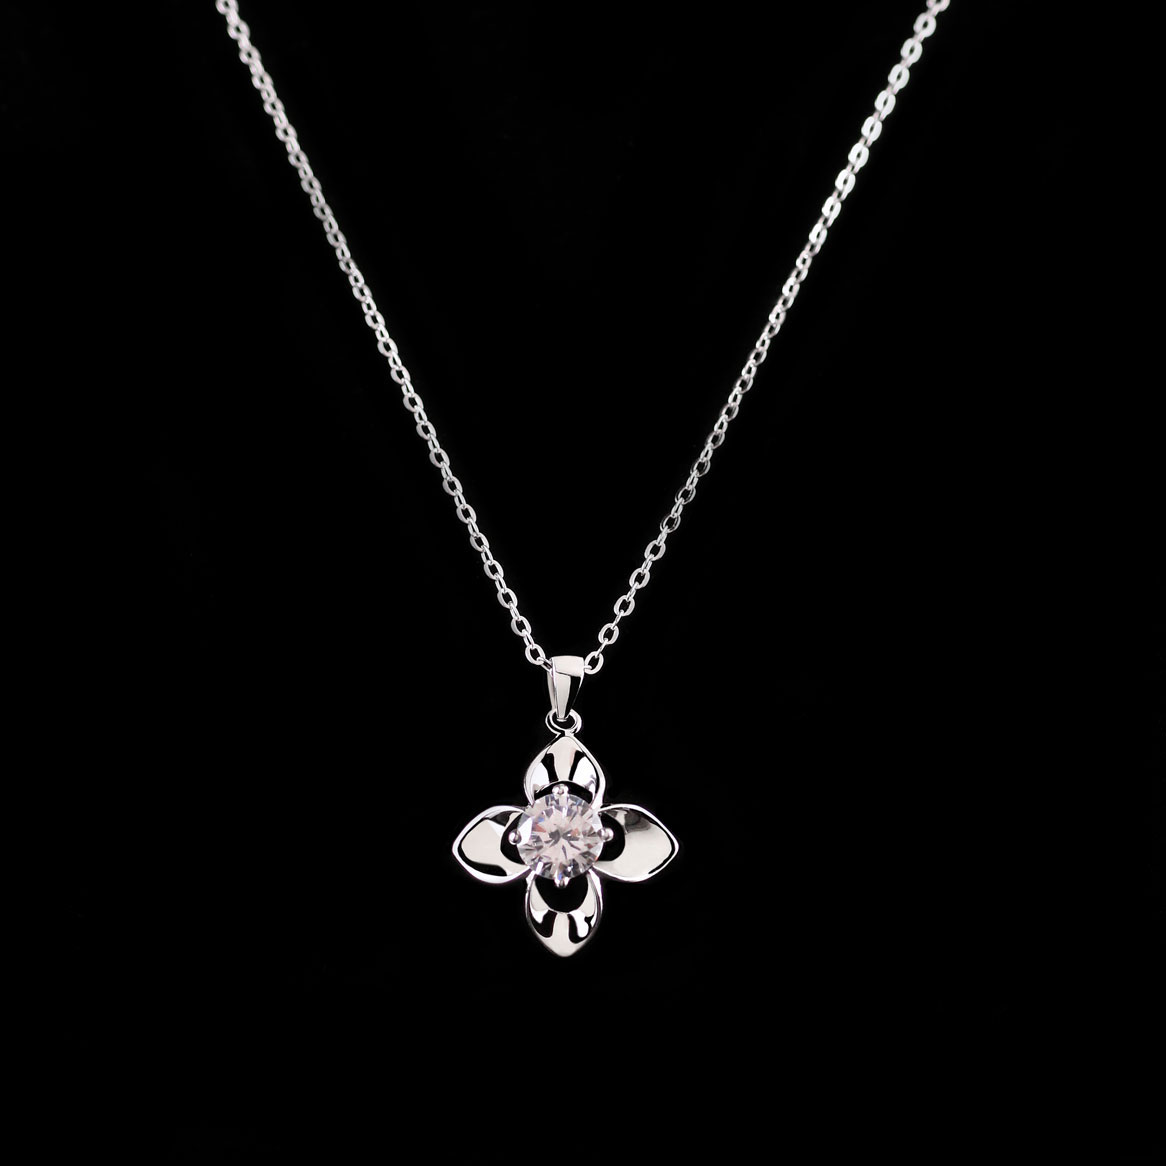 Cashs Ireland, Crystal and Sterling Silver Irish Rose Solitaire Necklace